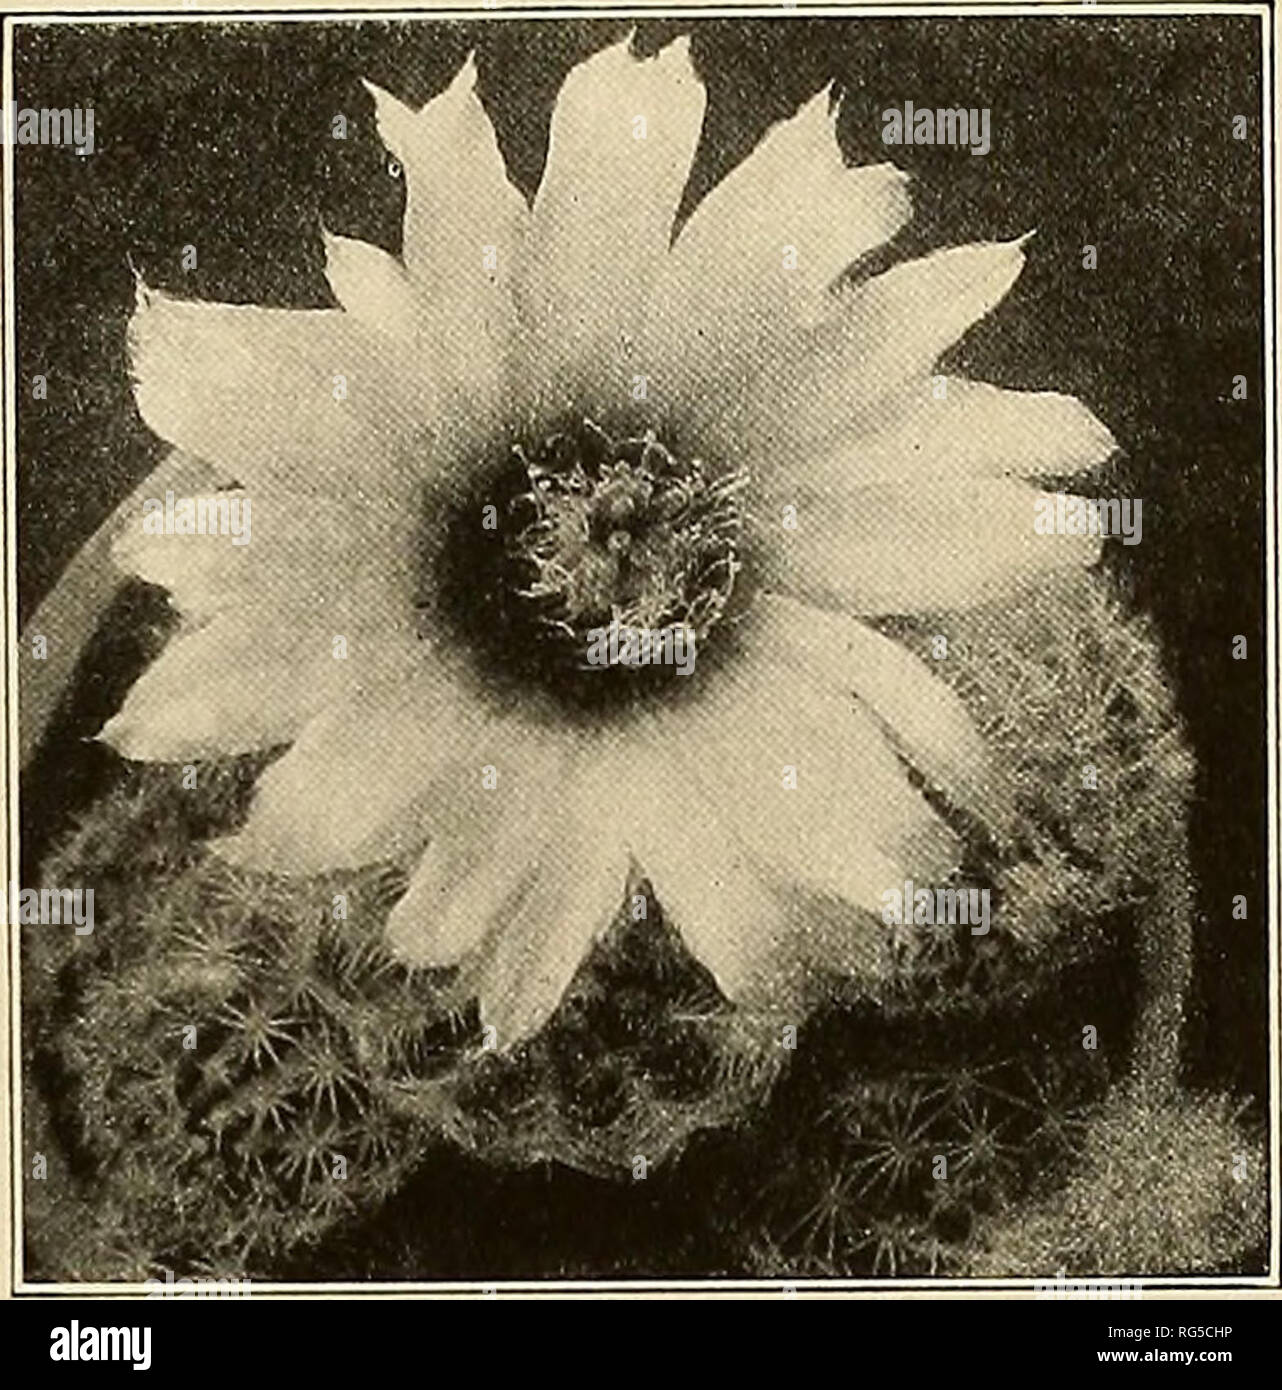 . The Cactaceae : descriptions and illustrations of plants of the cactus family. ECHINOCEREUS. 25. Fig. 24.—Echinocereus perbellus. Collected by Rose and Standley at Big Springs, Texas, February 23, 1910 (No. 12215). This is a very beautiful species which flowers abundantly in cultivation. If heretofore collected, it has doubtless passed as the next species to which it is related. Rose and Standley, who discovered it wild in 1910, also found it in cultivation in Texas. Figure 24 is from a photograph of the type specimen. 33. Echinocereus reichenbachii* (Terscheck) Haage jr., Index Kewensis 2:8 Stock Photo